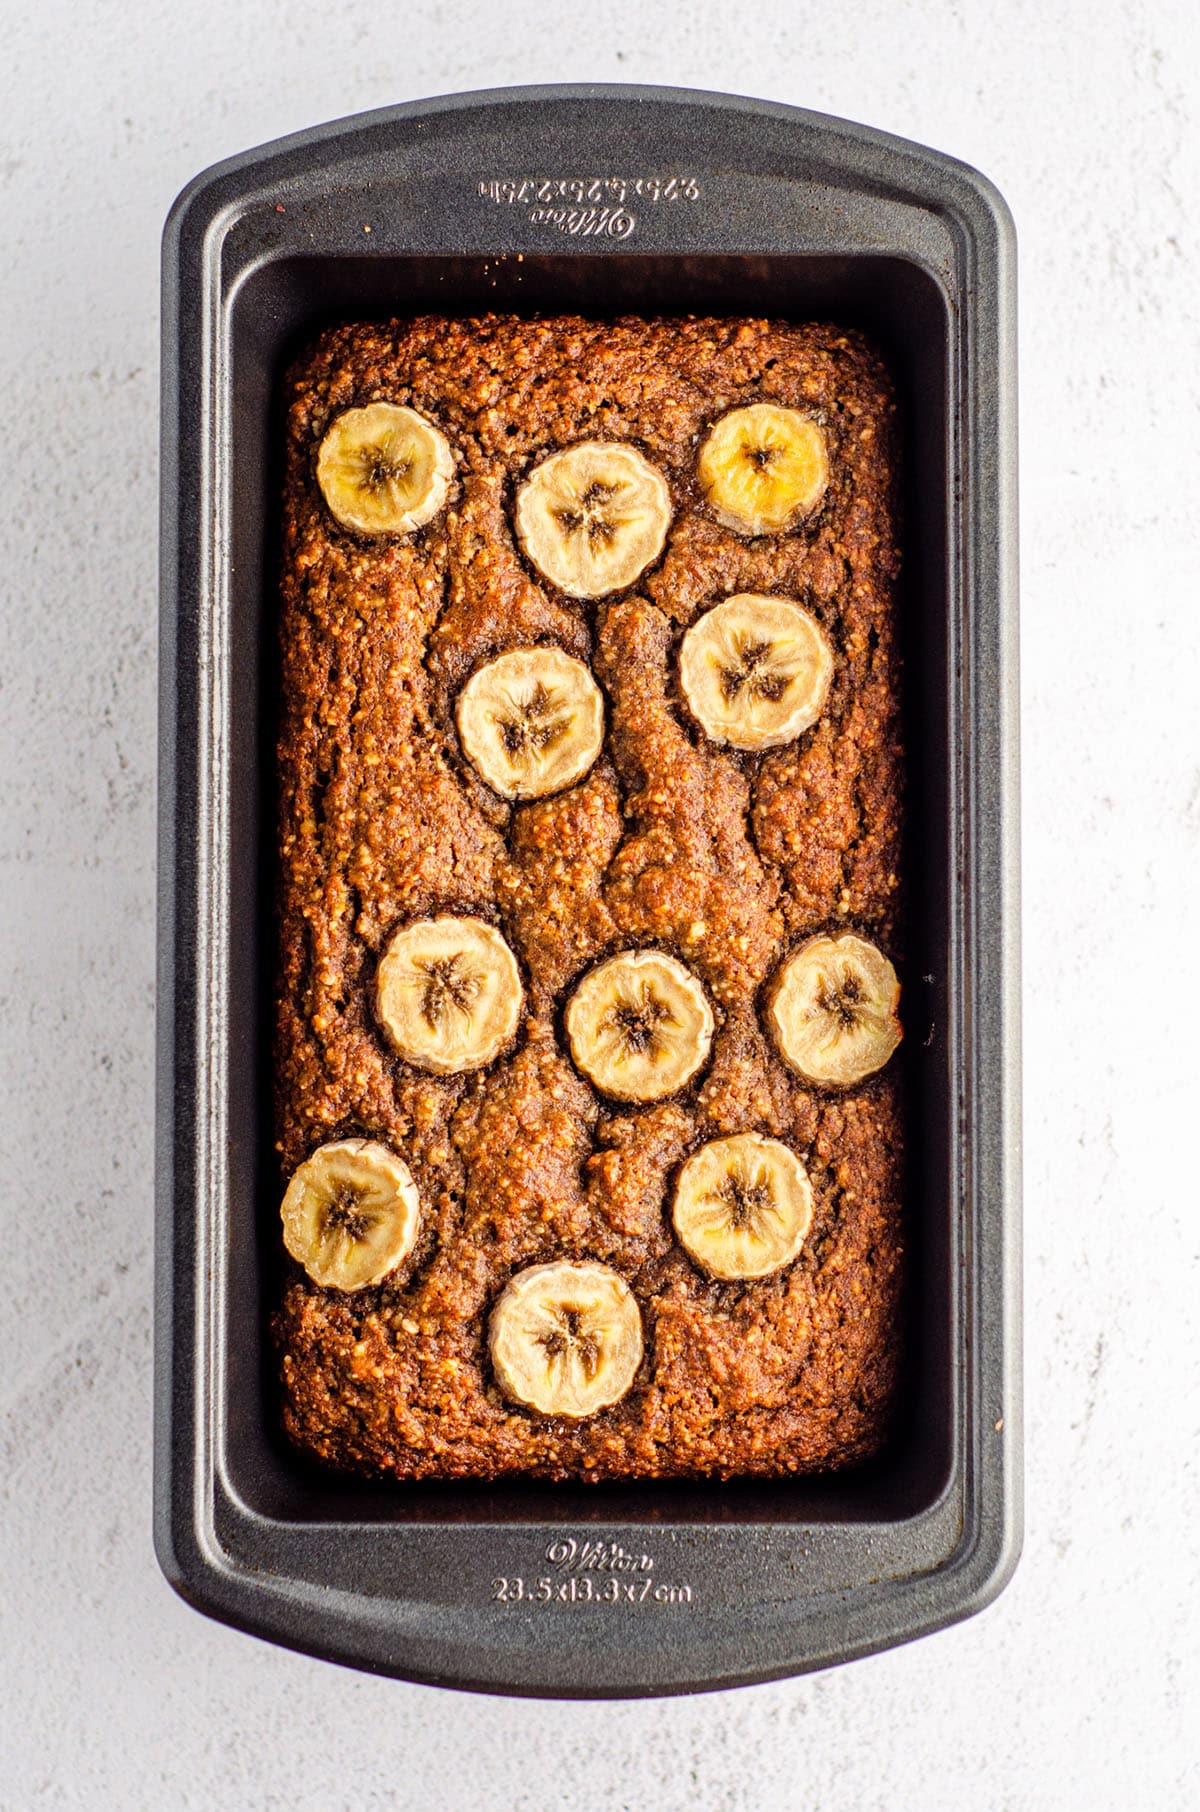 almond flour banana bread baked in a loaf pan with banana slices baked into the top